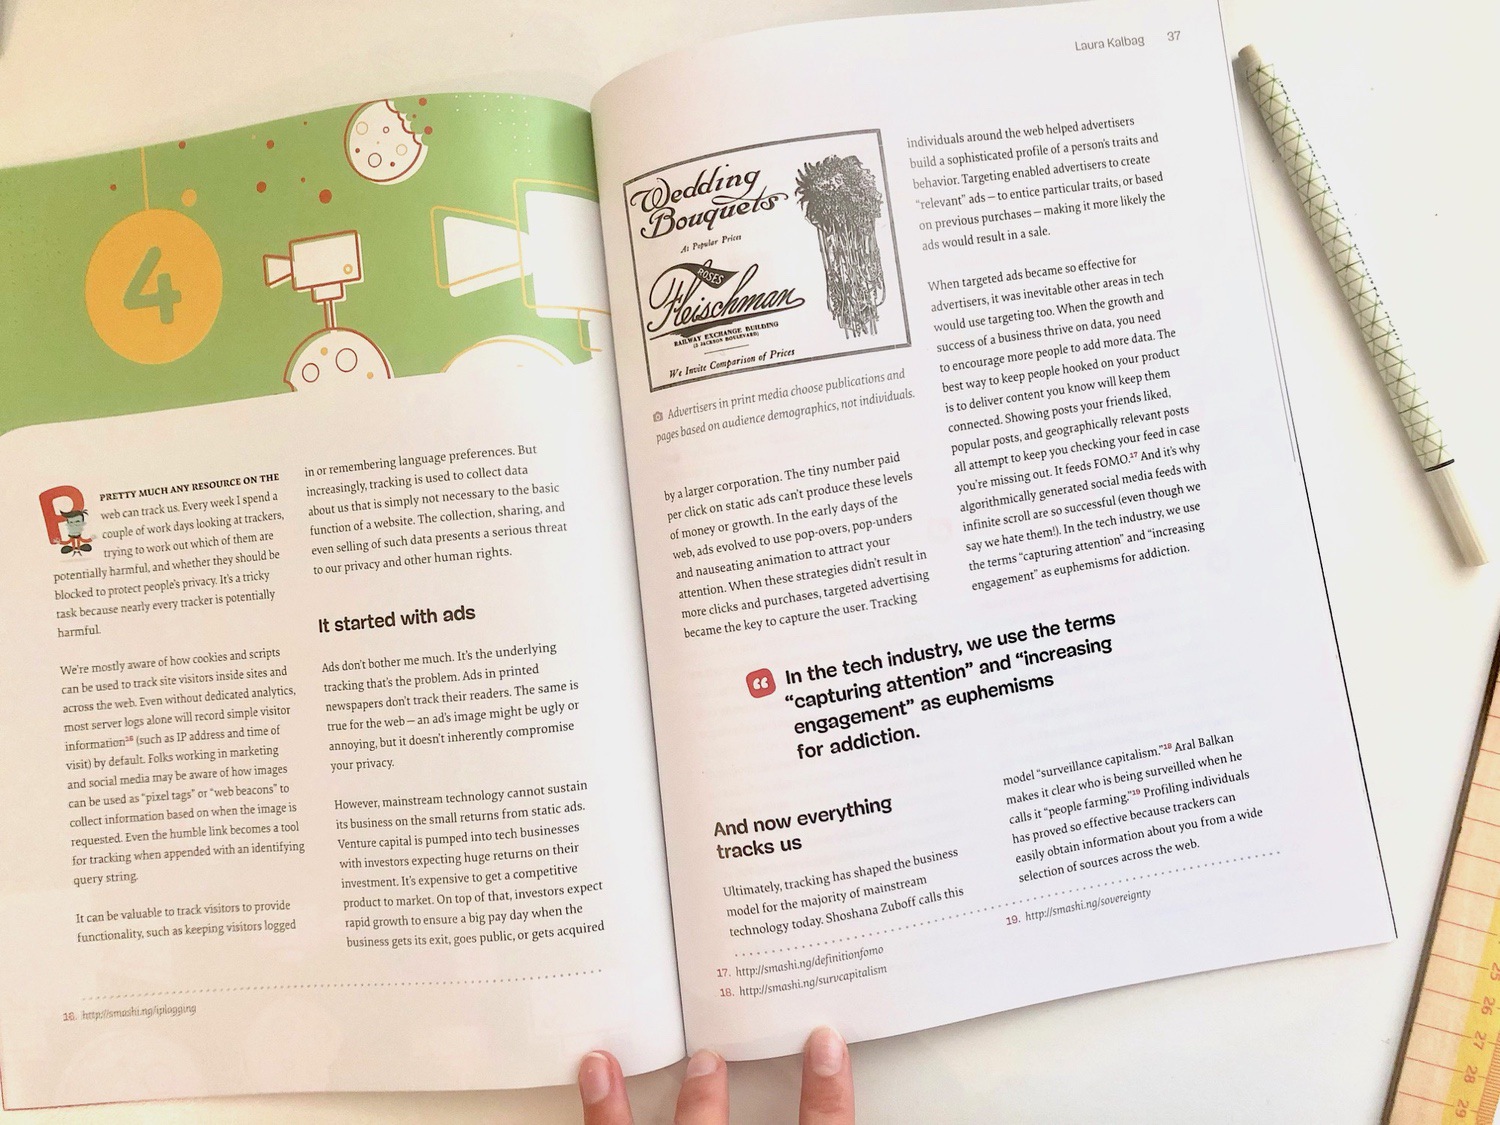 Inside pages of printed magazine showing my essay including the pull quote “In the tech industry we use the terms ‘capturing attention’ and ‘increasing engagement’ as euphemisms for addiction”.